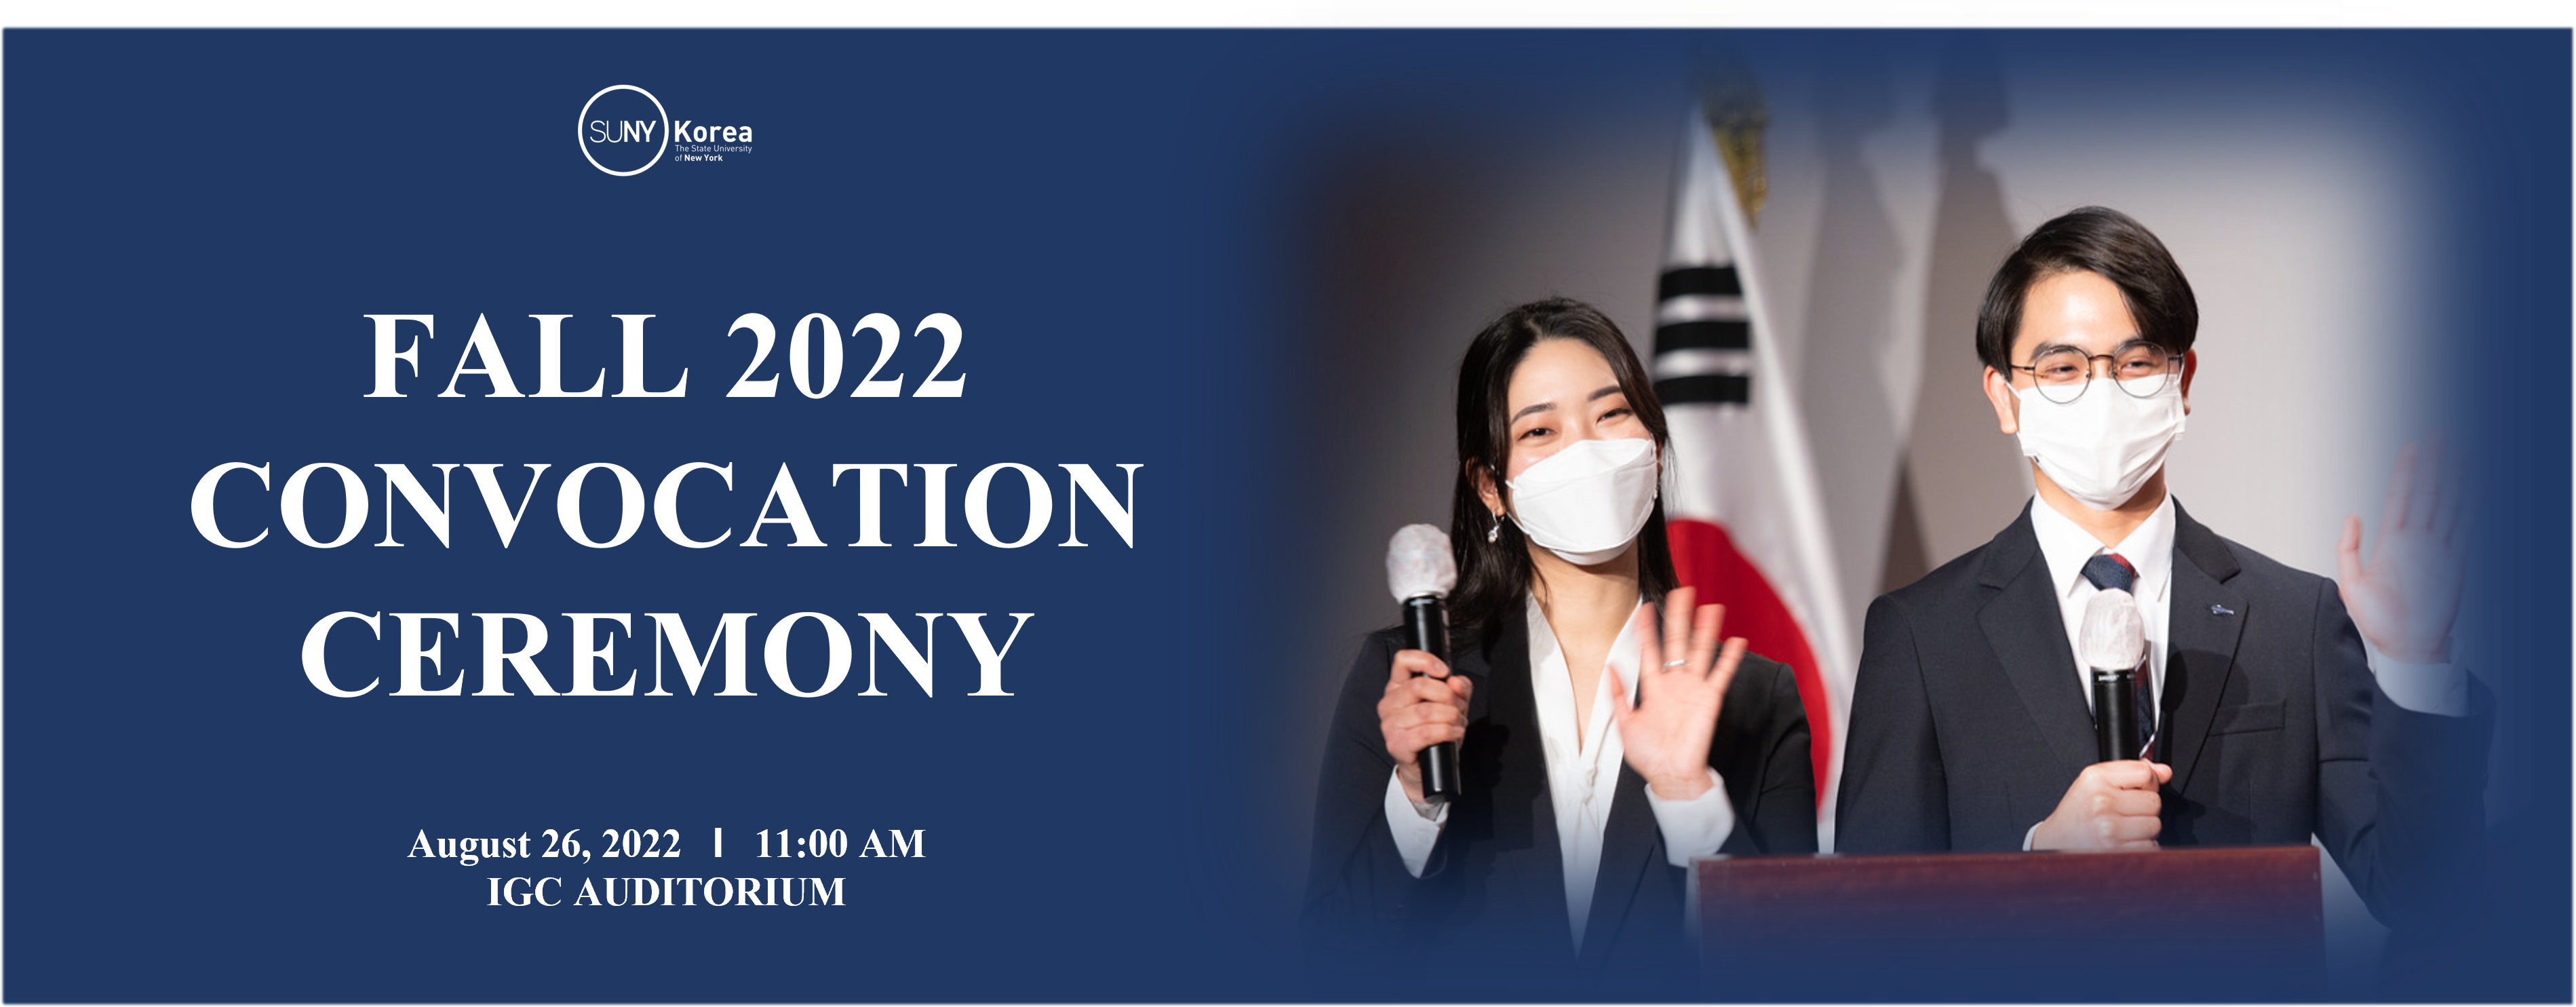 FALL 2022 CONVOCATION CEREMONY image